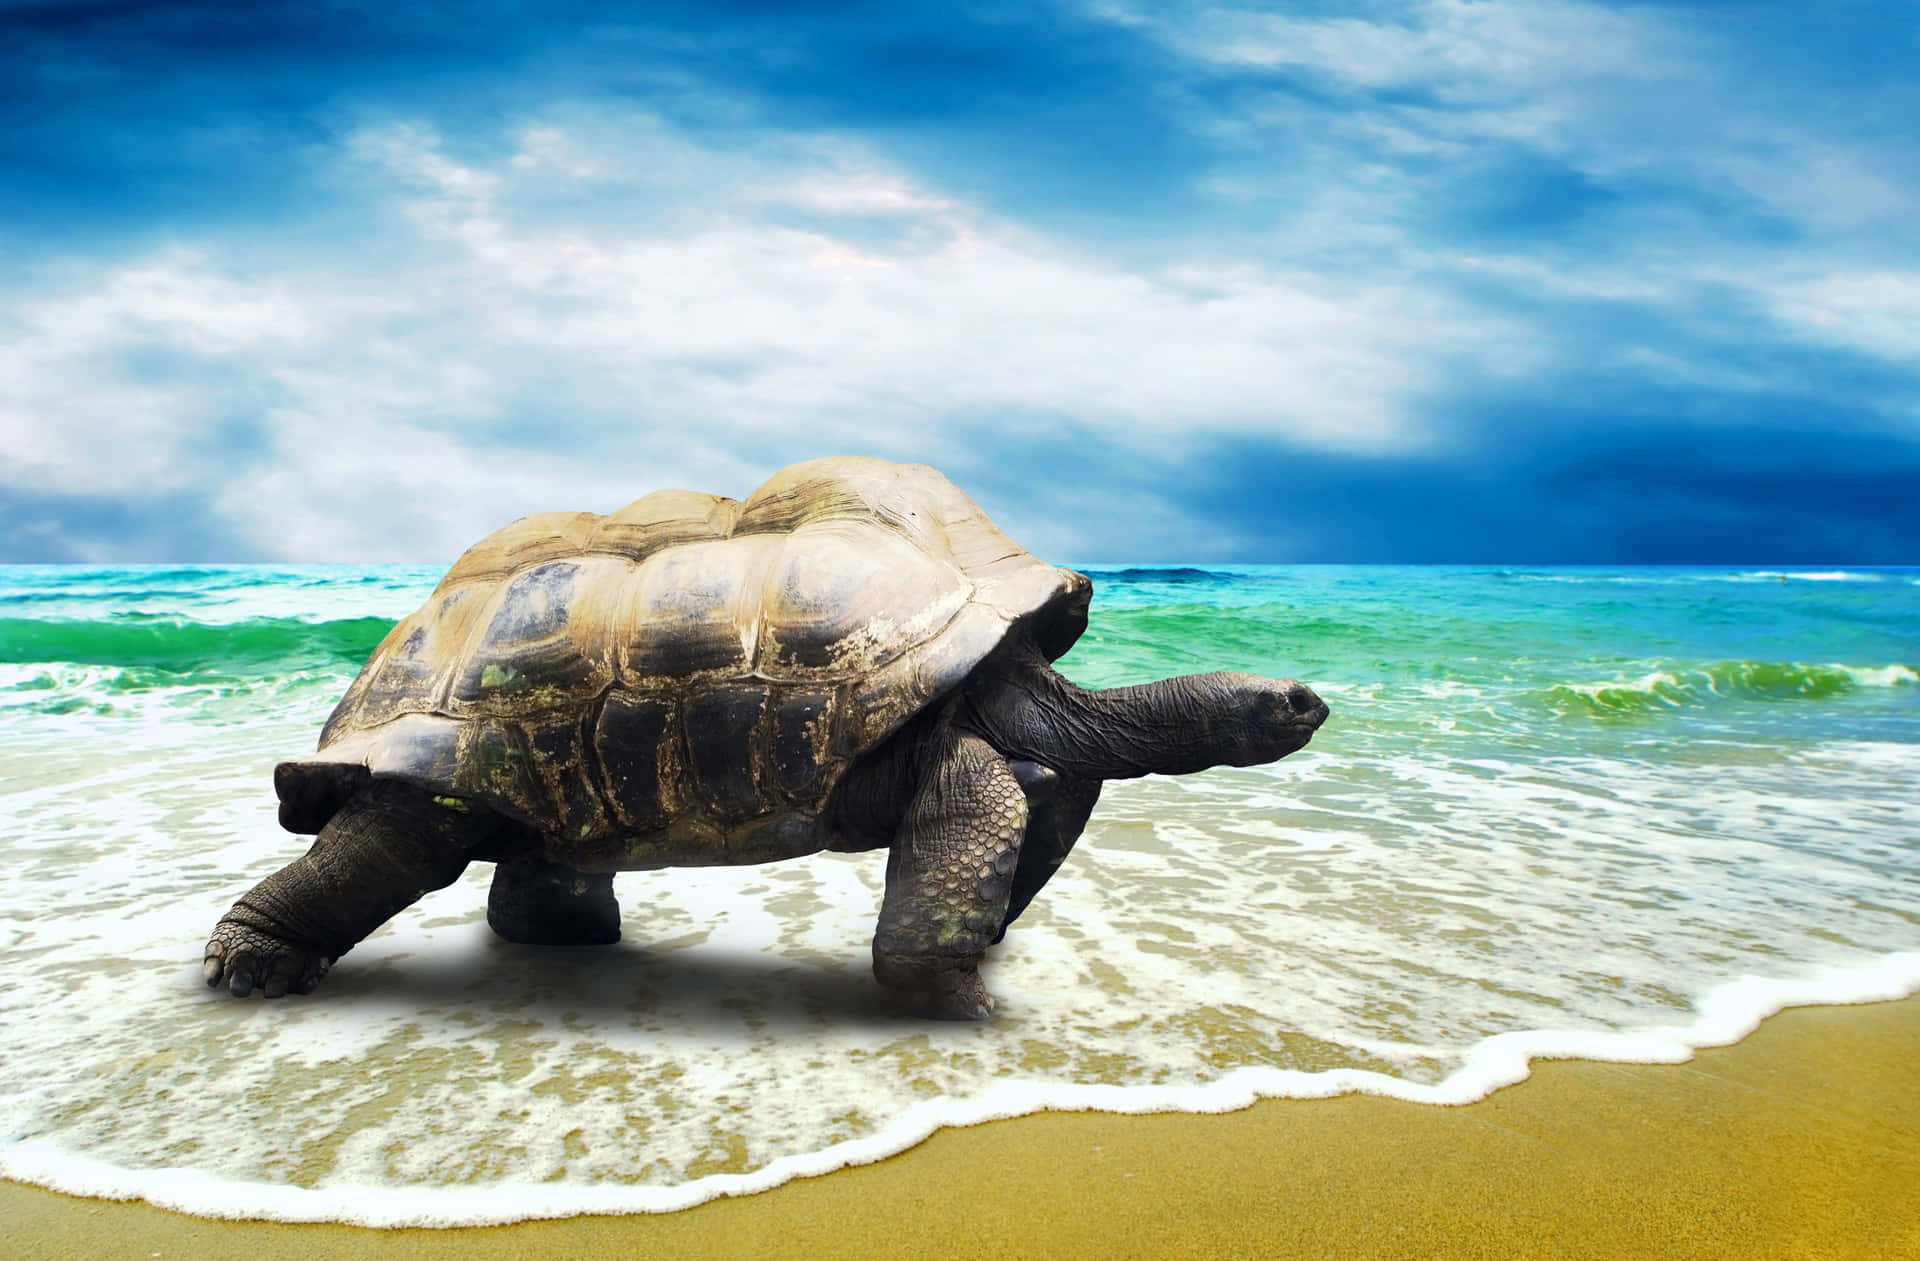 a turtle walking on the beach